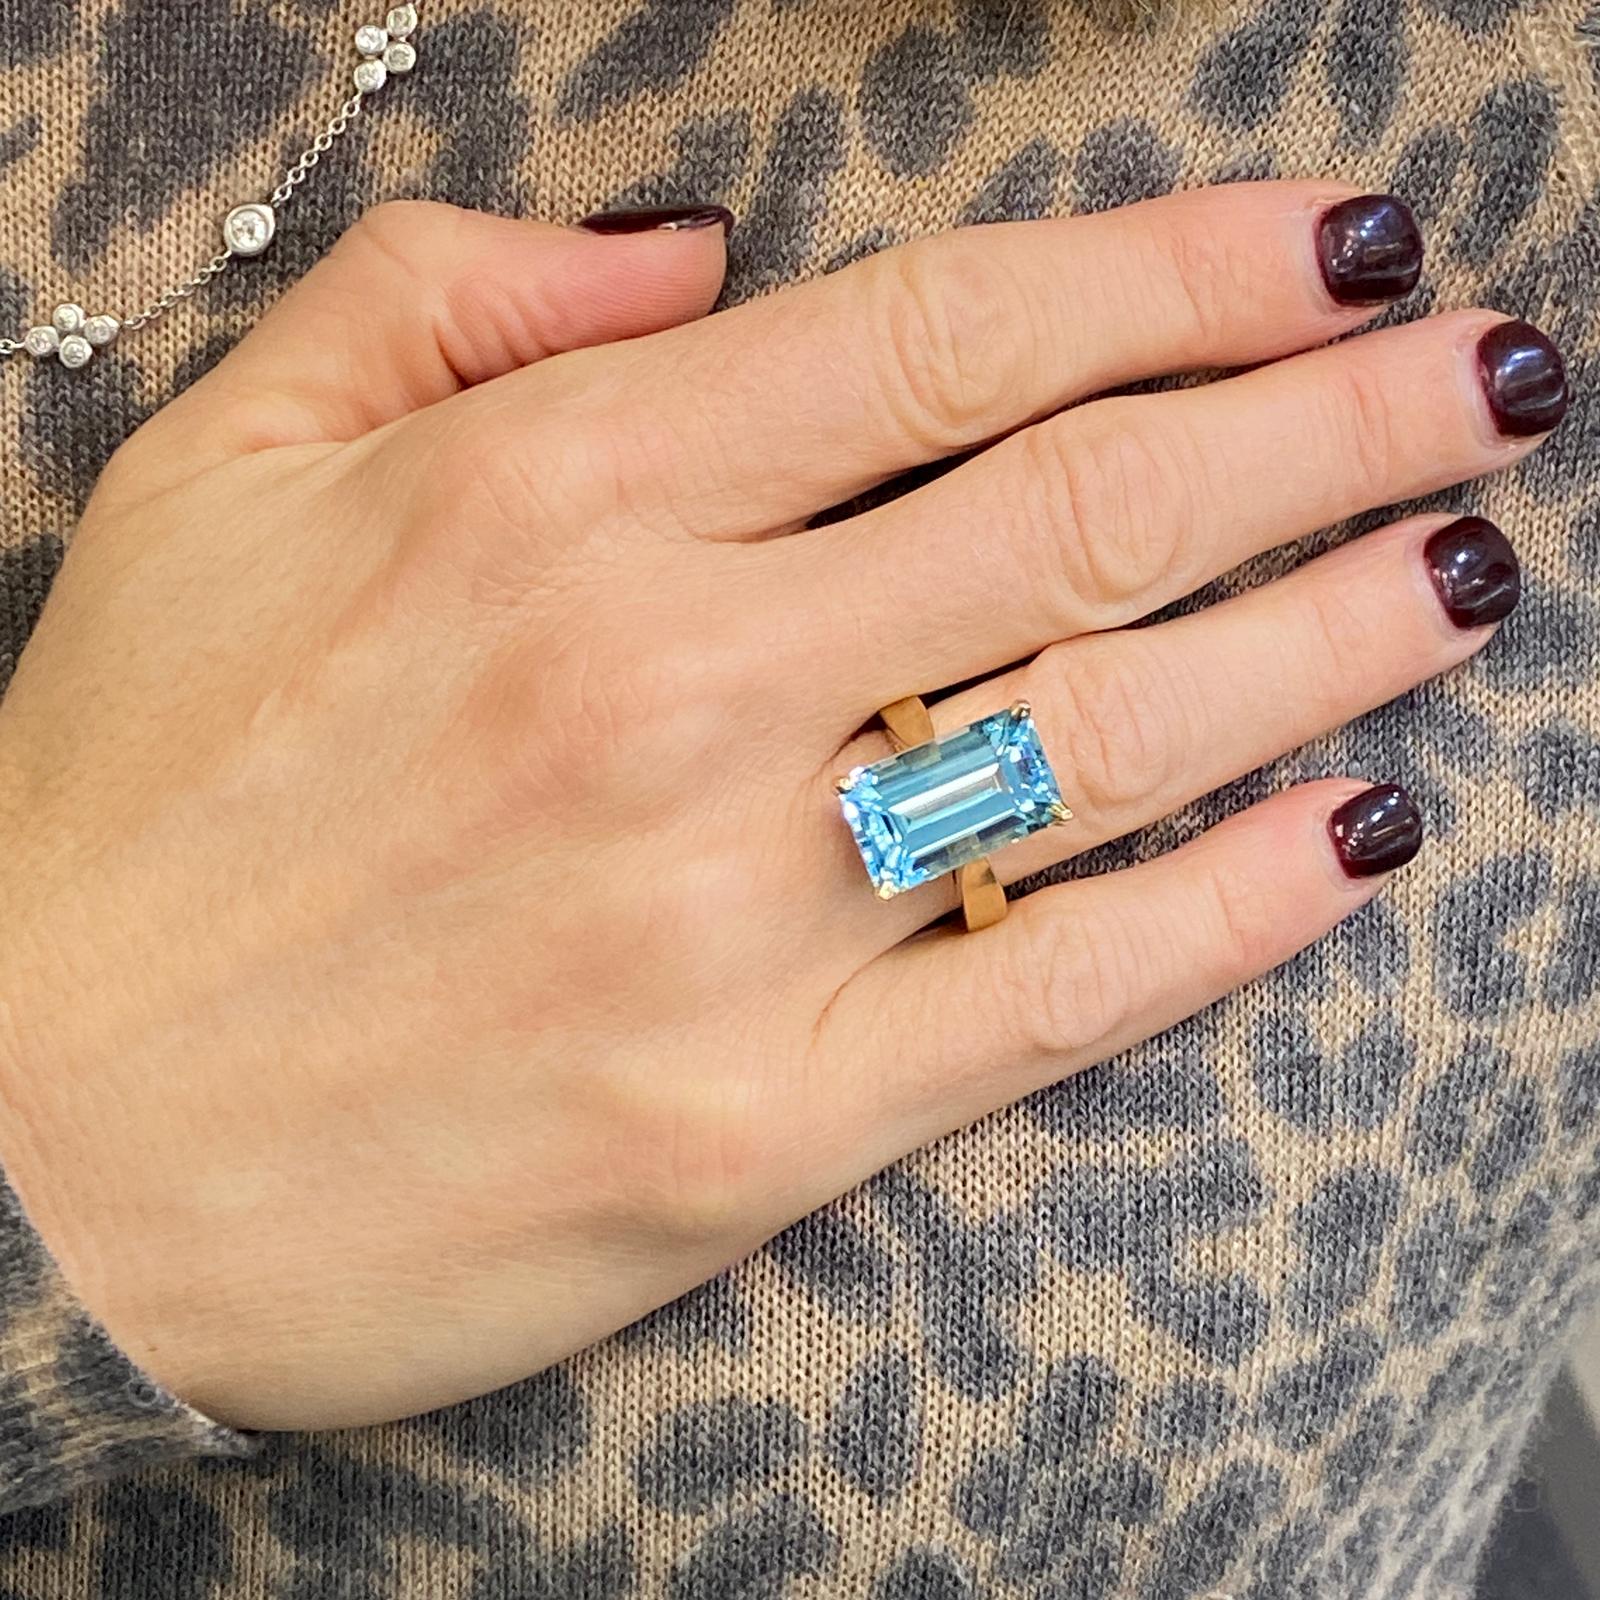 Modern aquamarine cocktail ring fashioned in 14 karat yellow gold. The bright blue aquamarine measures 10.5 x 18mm and is approximately 12 carats. The ring is currently size 6.25 (can be sized).